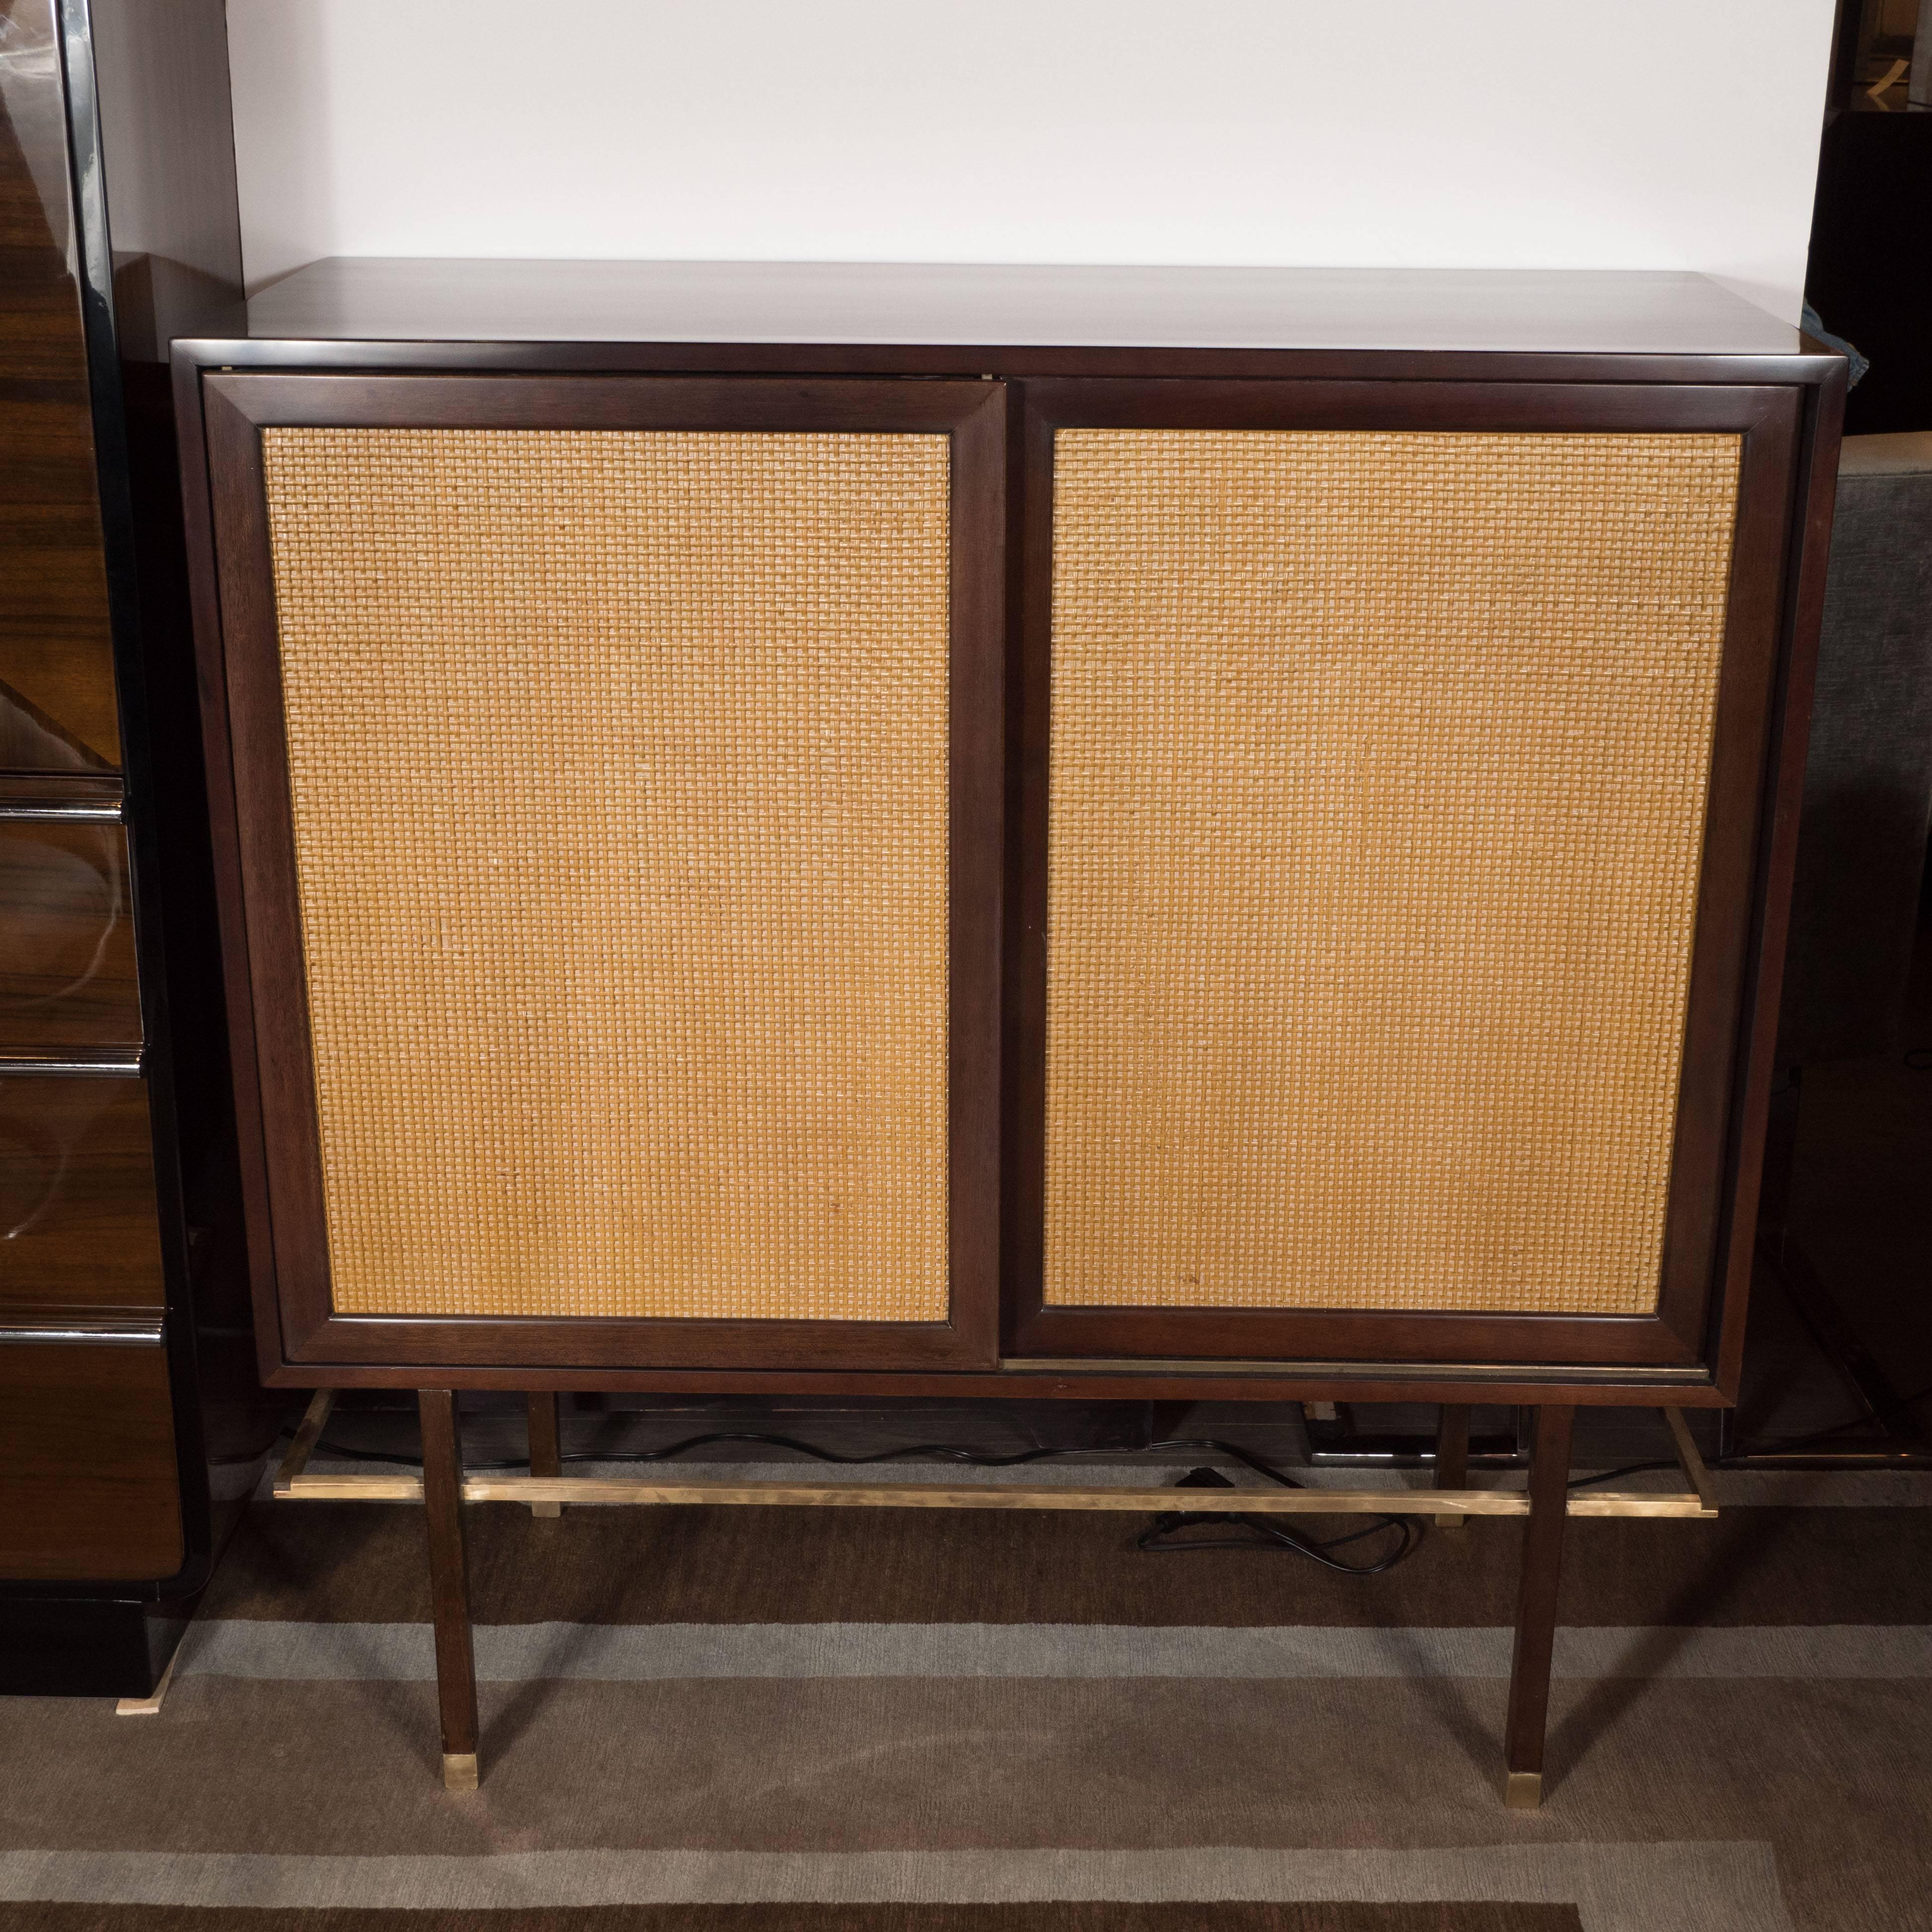 This sophisticated cabinet was designed by Harvey Probber, circa 1960 and handmade in Fall River, Massachusetts. Probber was celebrated with his austere and elegant designs, creating furniture with the belief that 